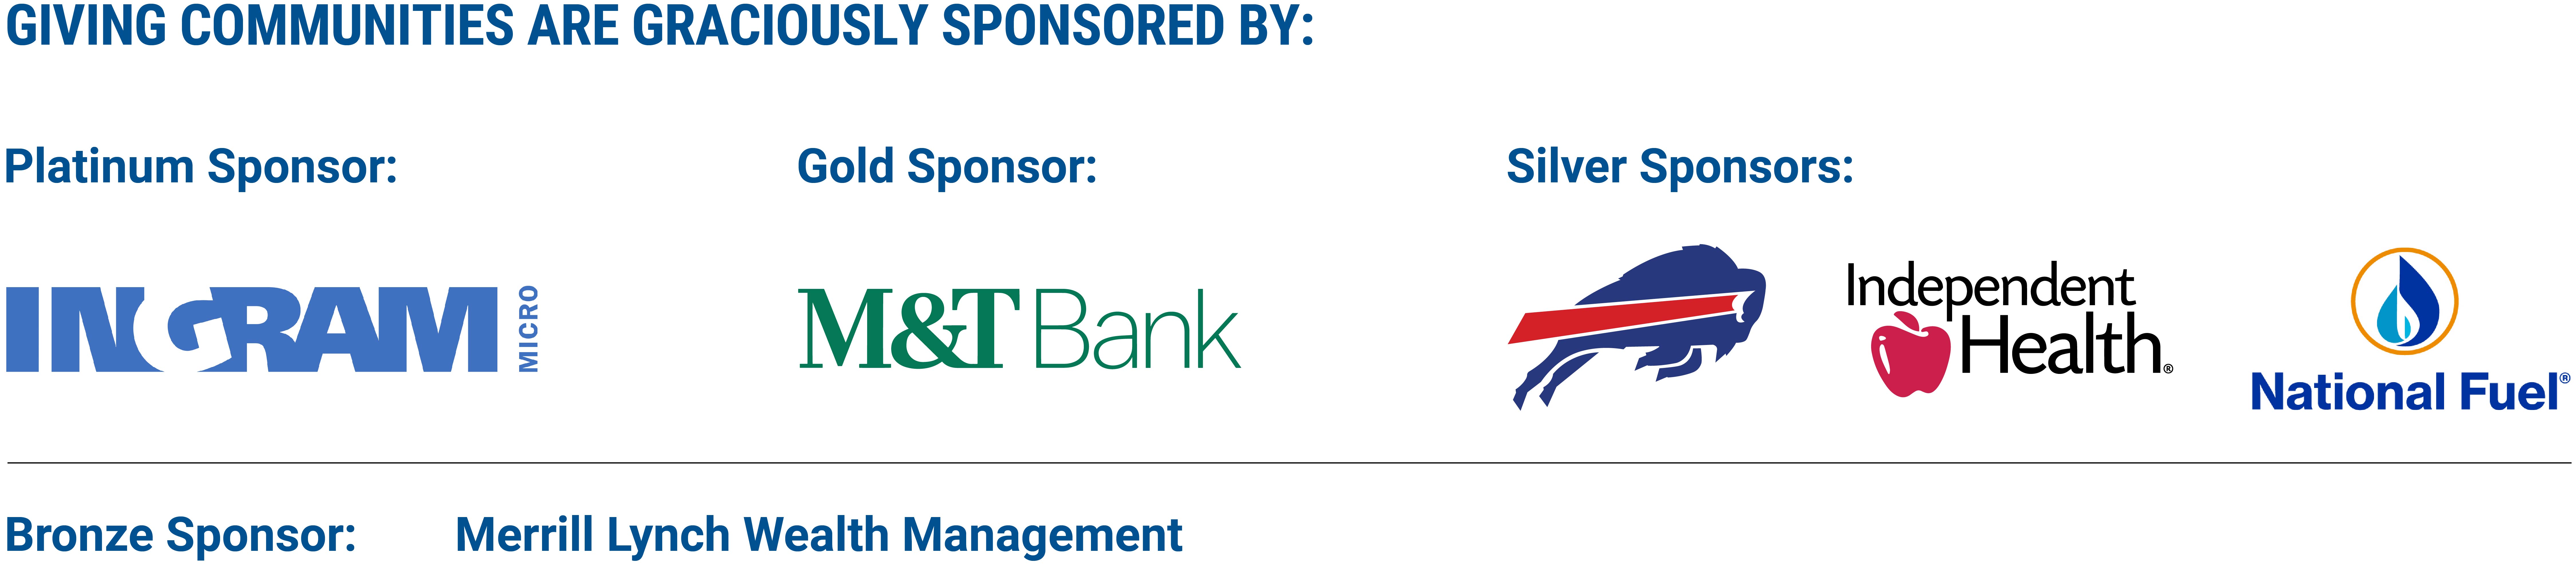 United Way Sponsors based. You will see Platinum Sponsors, Gold Sponsors, Silver Sponsors 